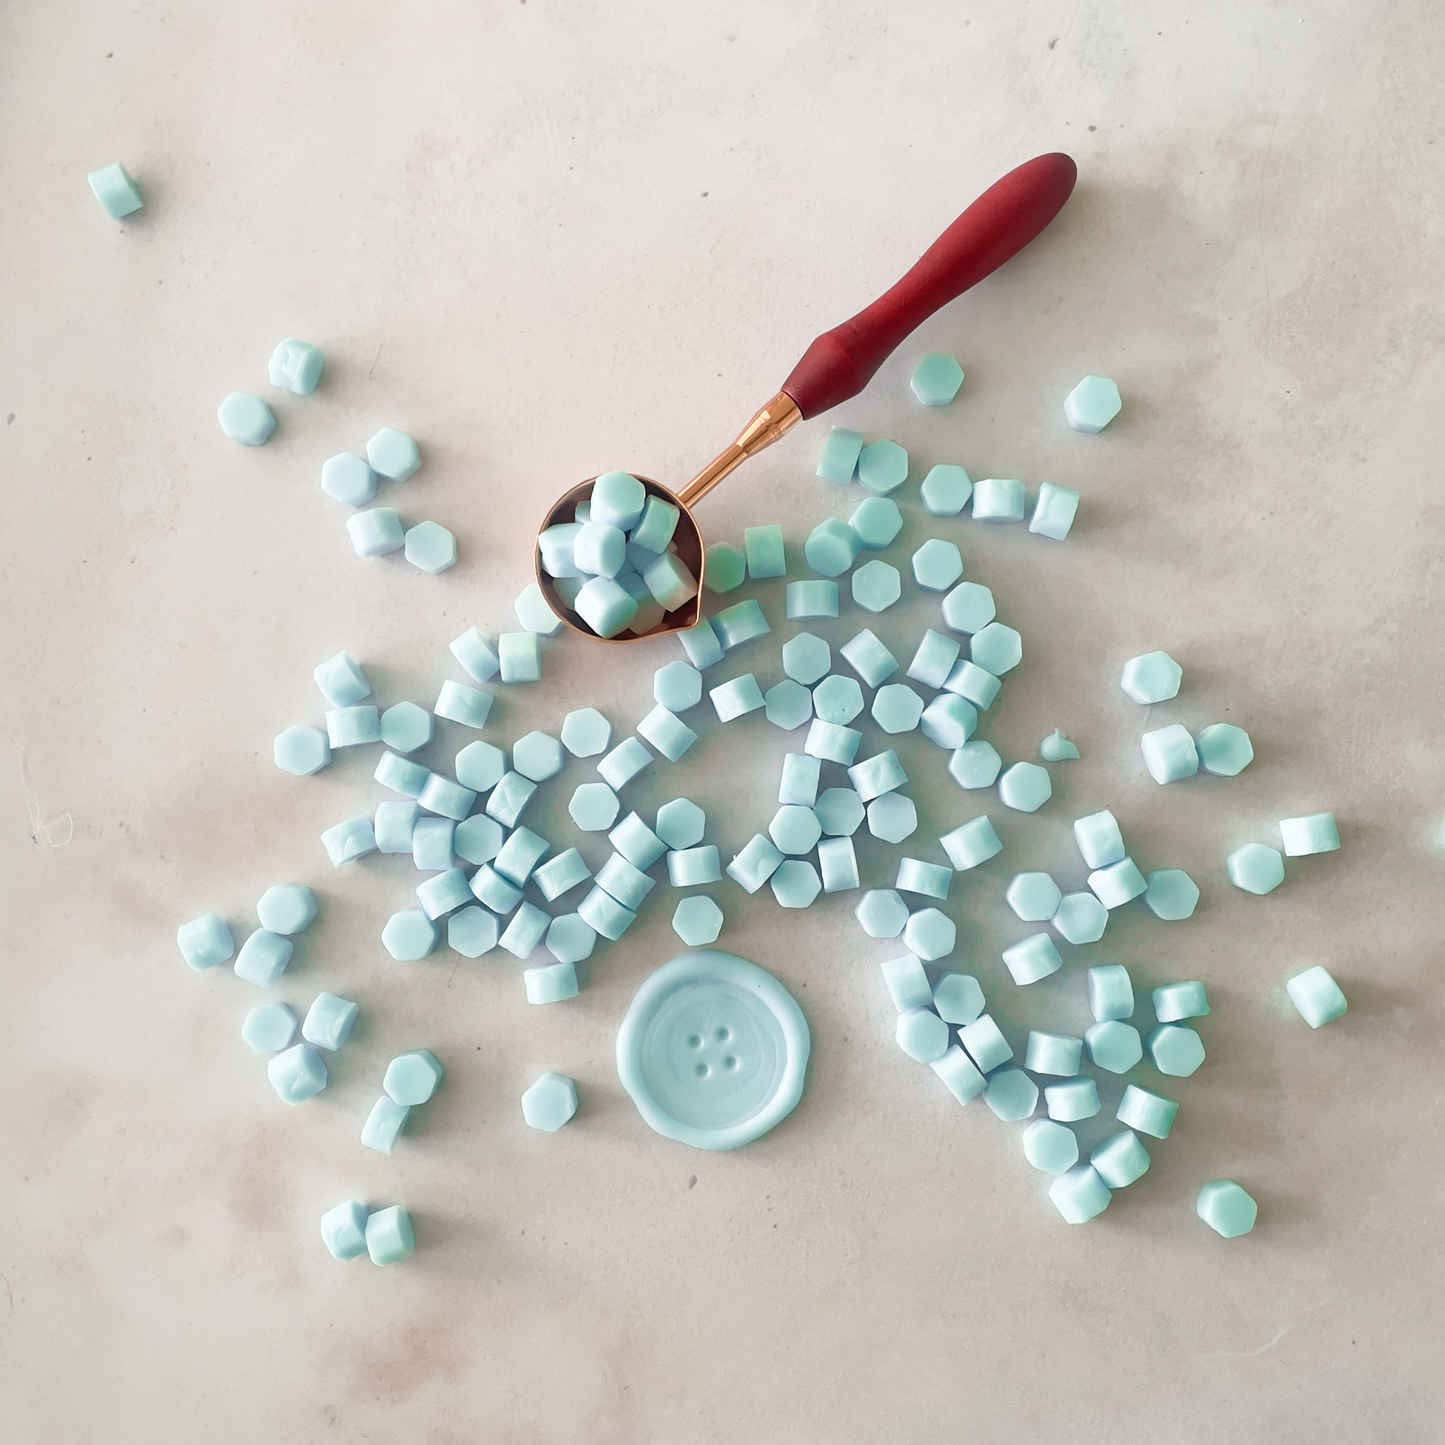 small wax beads for making wax seals.  Aqua blue colour wax to use with a melting spoon and wax stamp